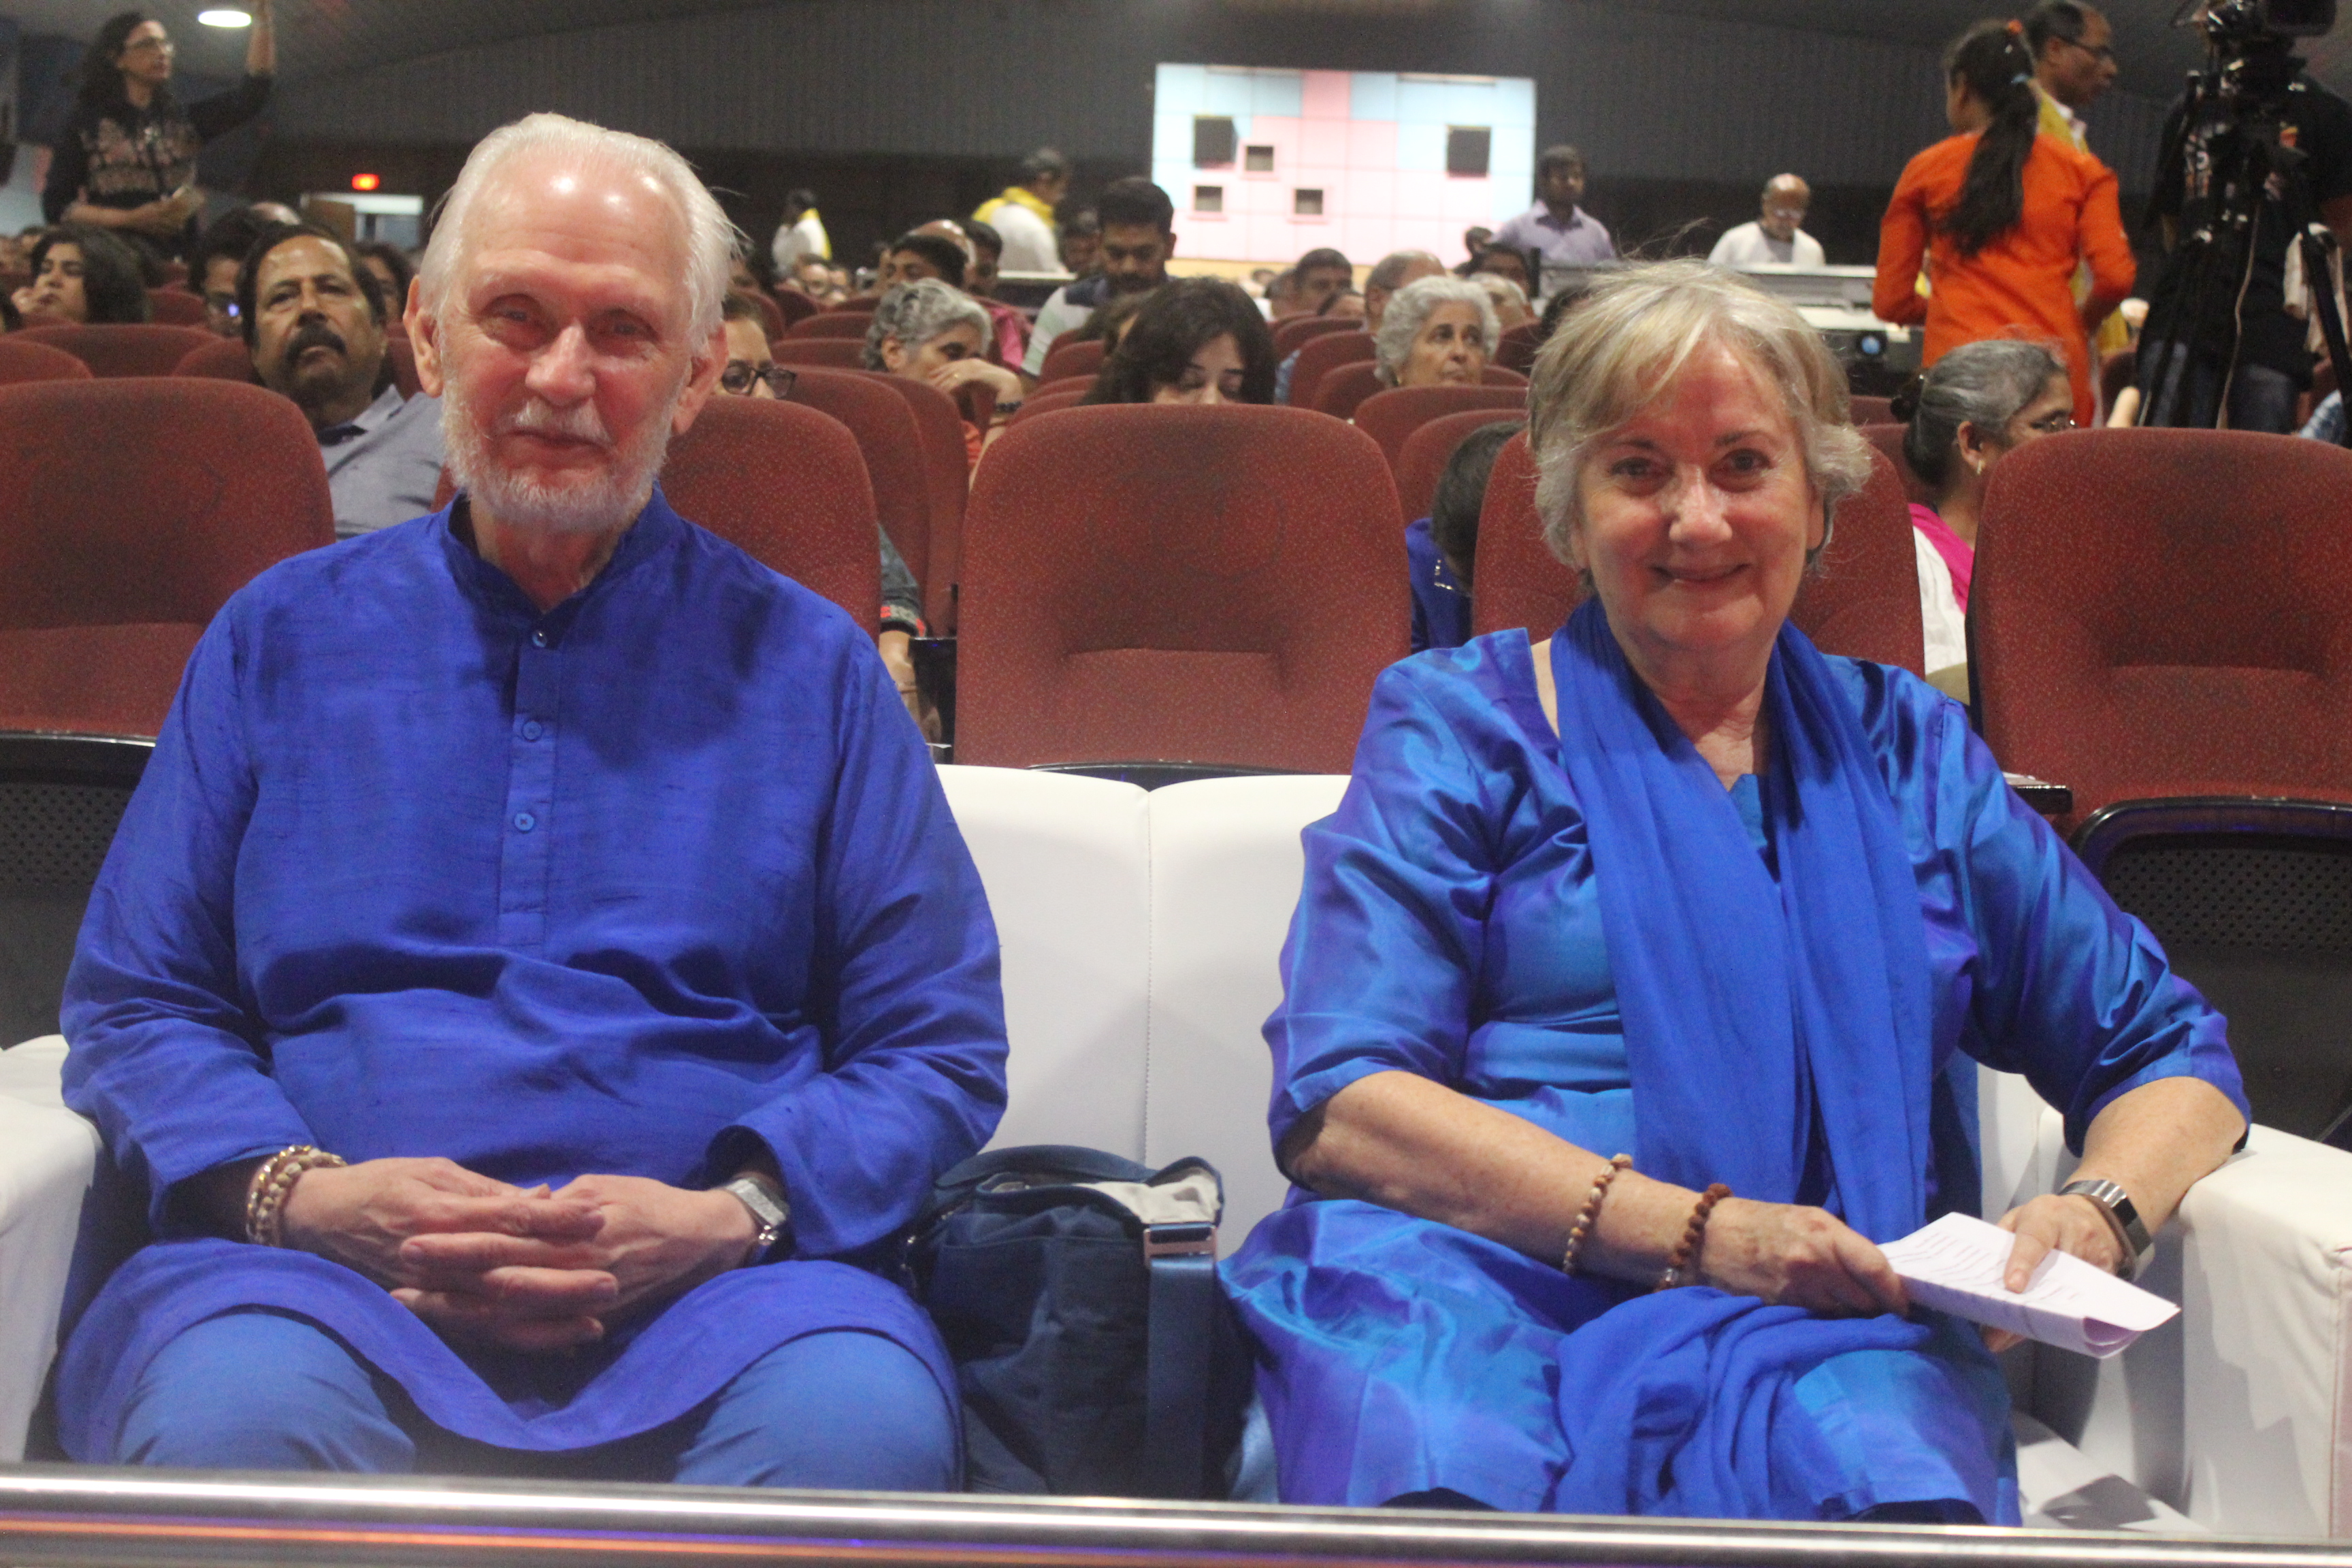 Nayaswamis Jyotish and Devi watch Indian classical musicians at a fundraising event for Yogananda Trust.